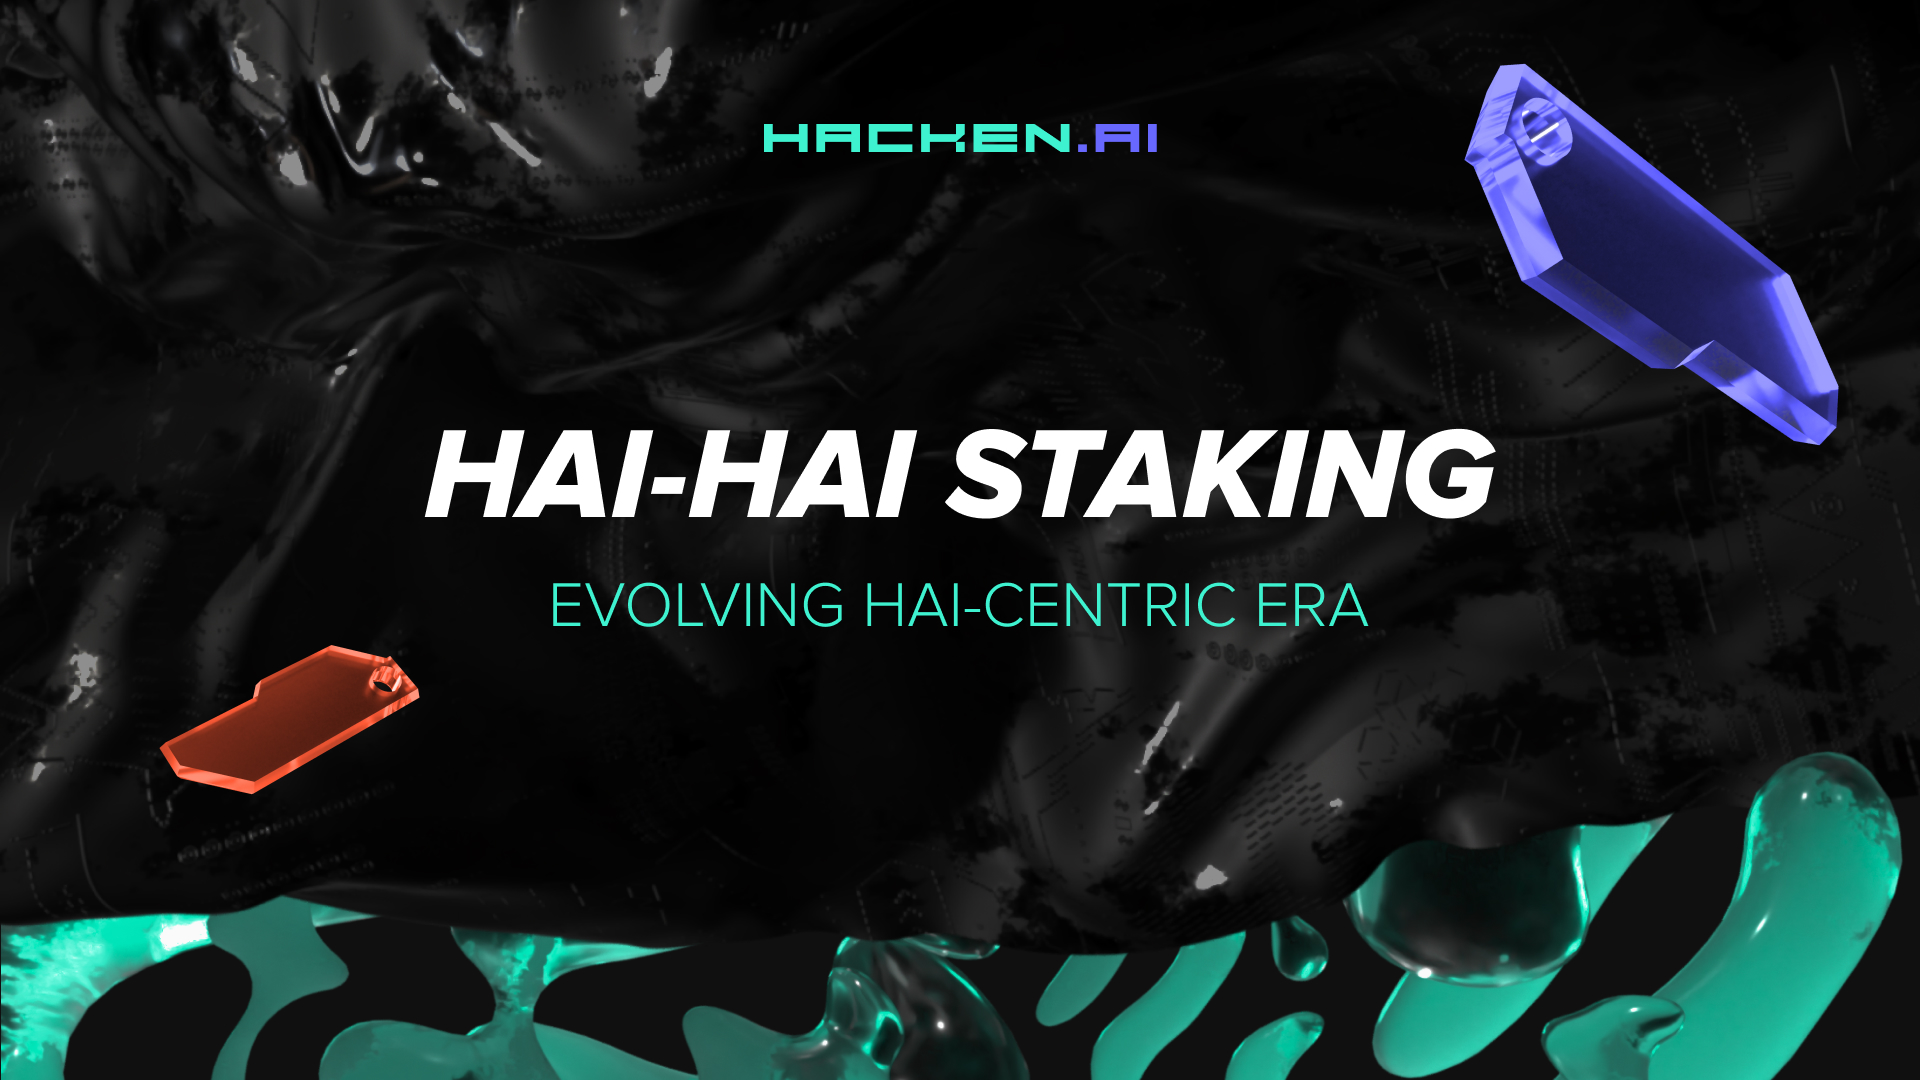 Last and Most Genuine HAI Staking